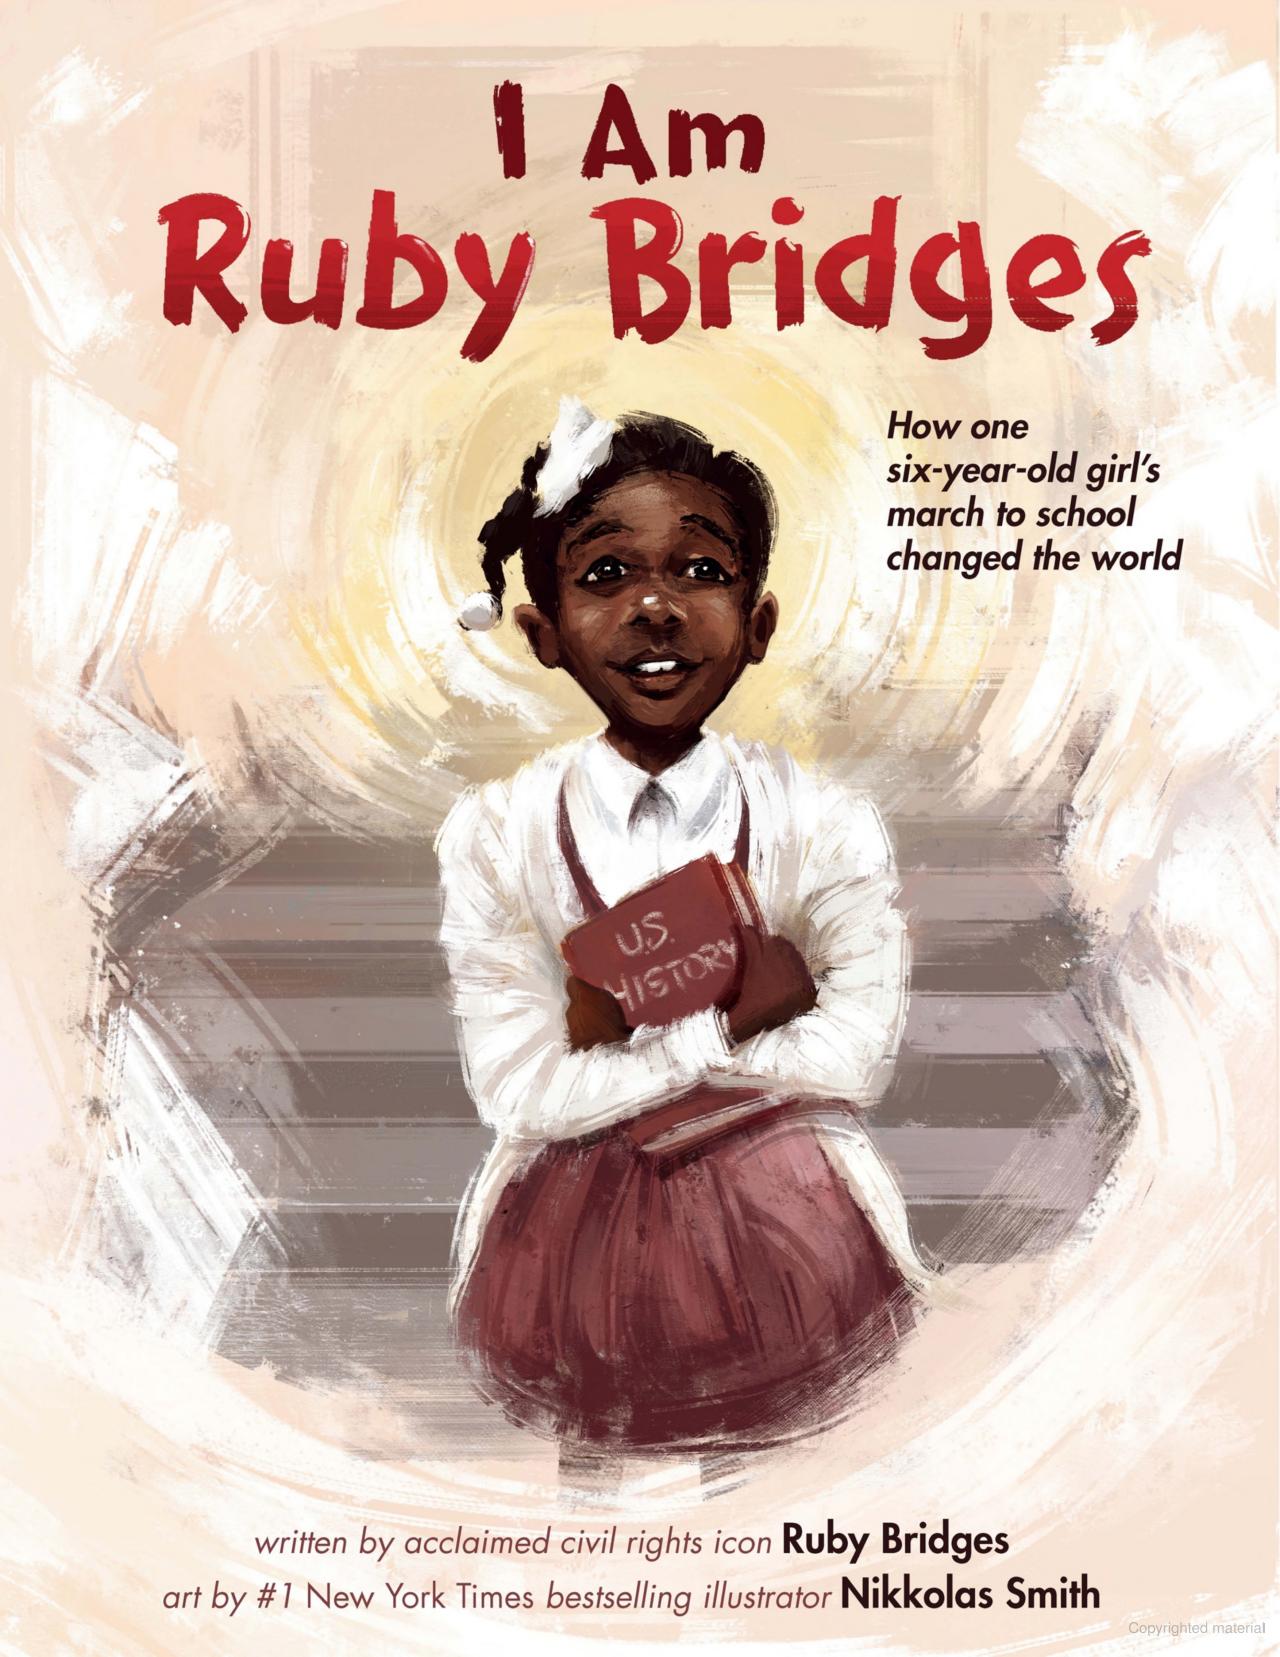 I Am Ruby Bridges: How One Six-Year-Old Girl's March to School Changed the World